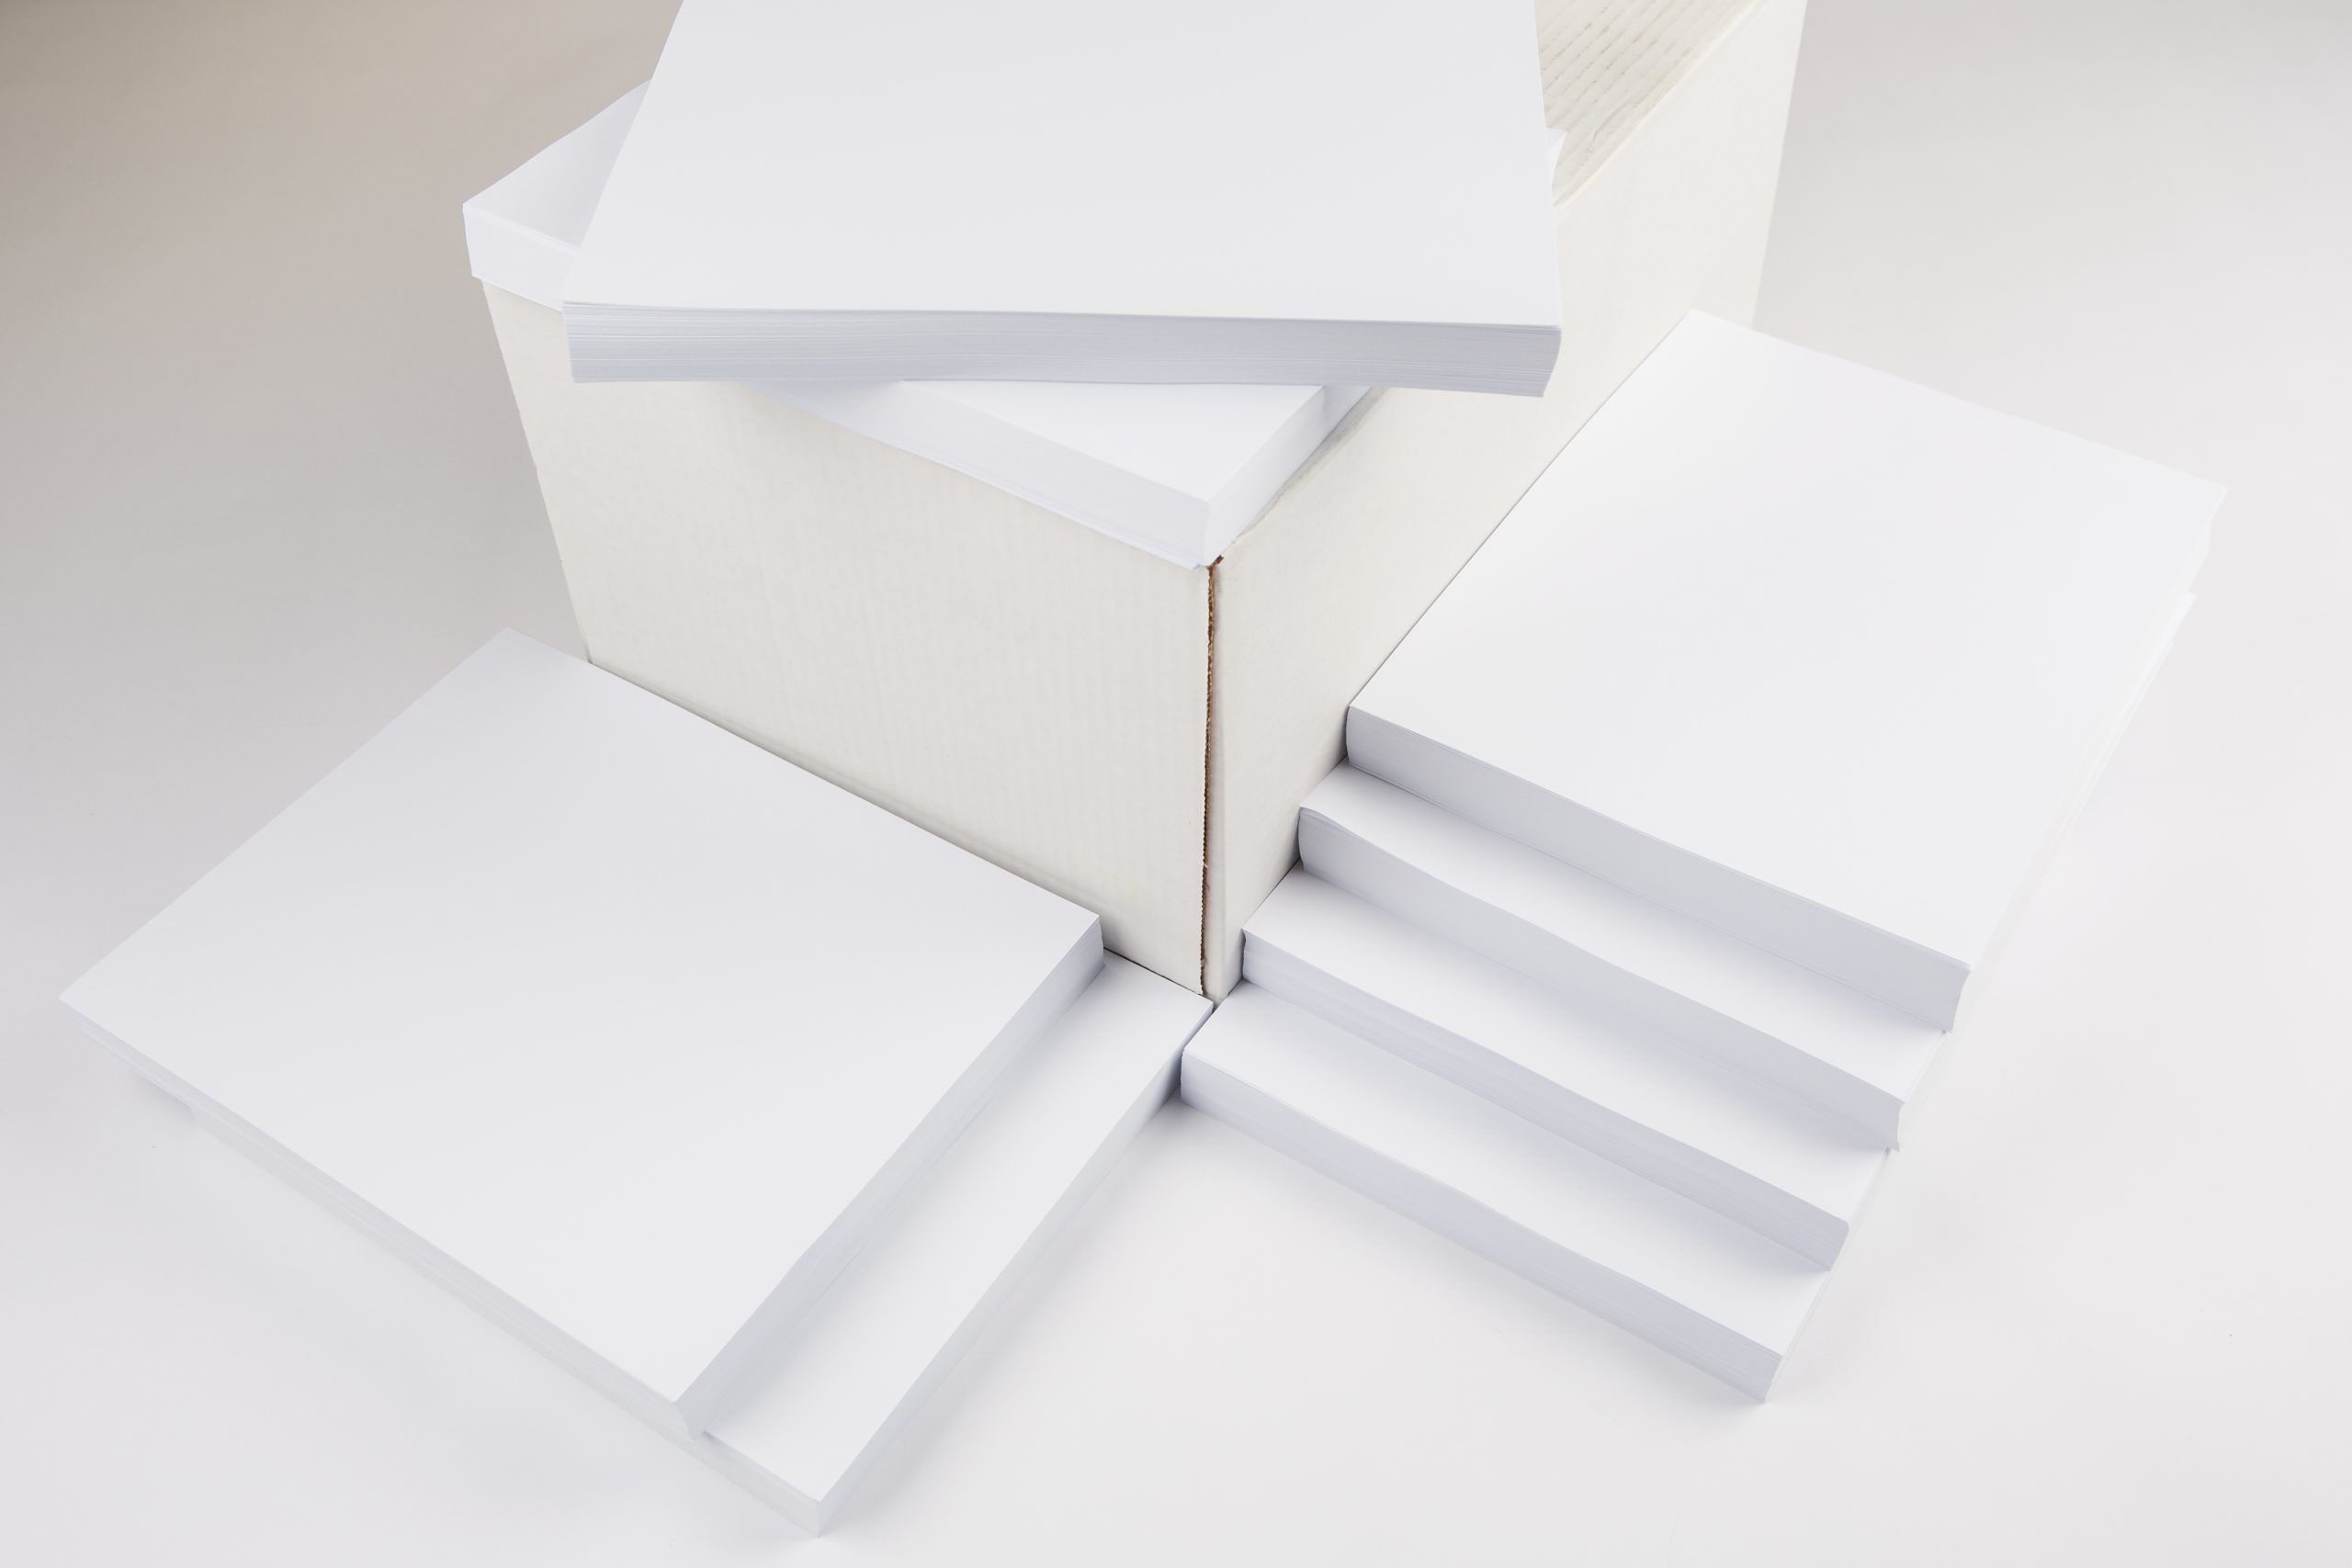 JAM Paper Glossy White 11 x 17 32lb. Double-Sided Cardstock Paper, 100  Sheets